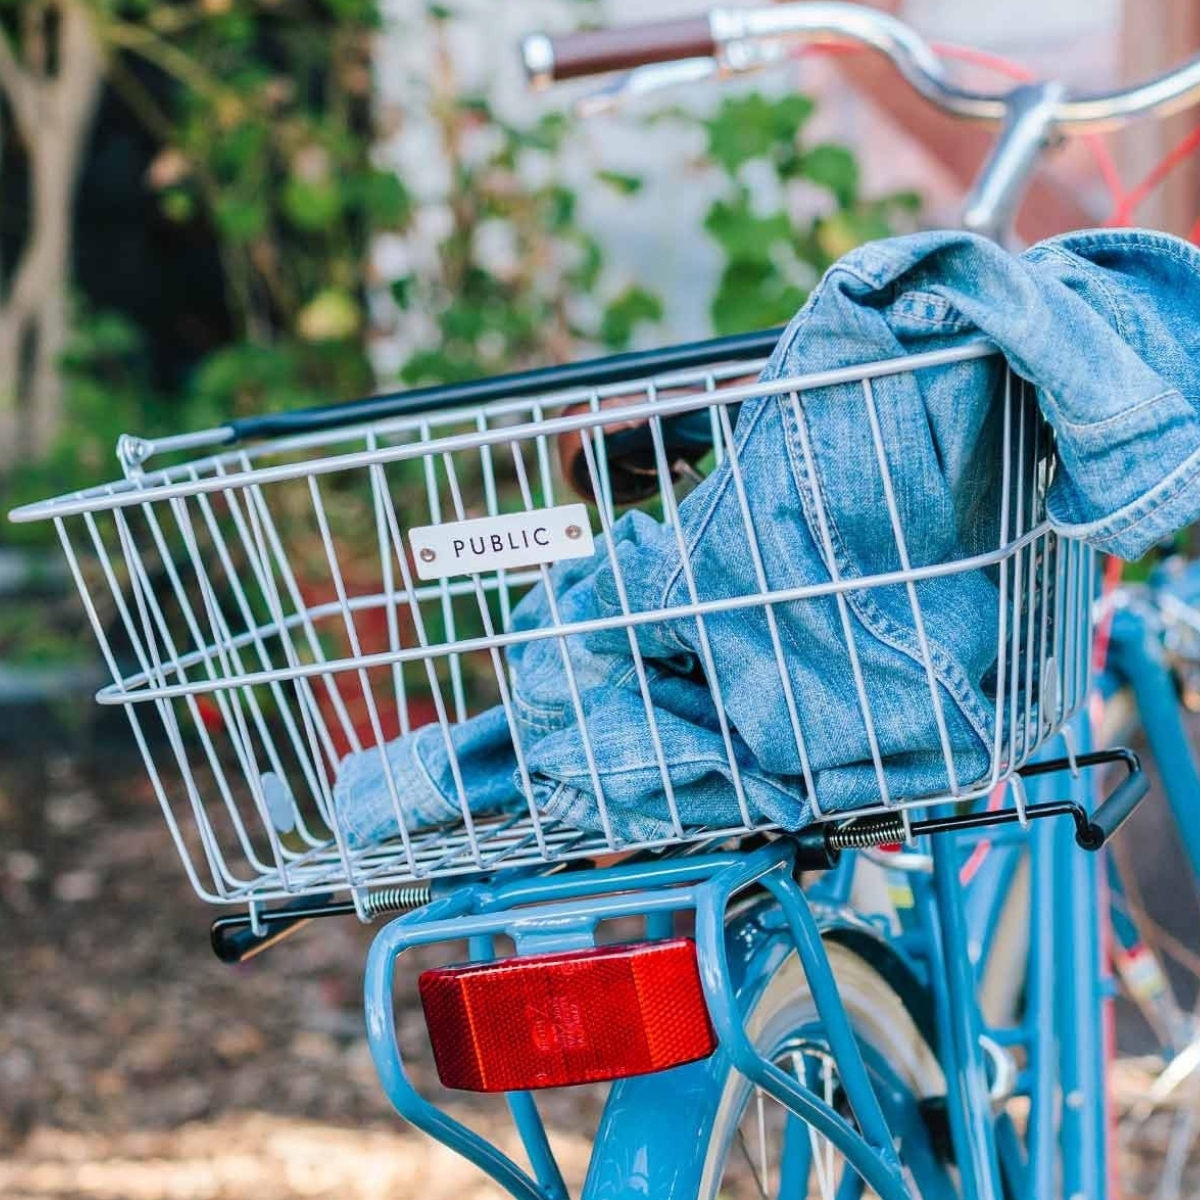 A Public Bikes metal bicycle basket with a denim jacket in it